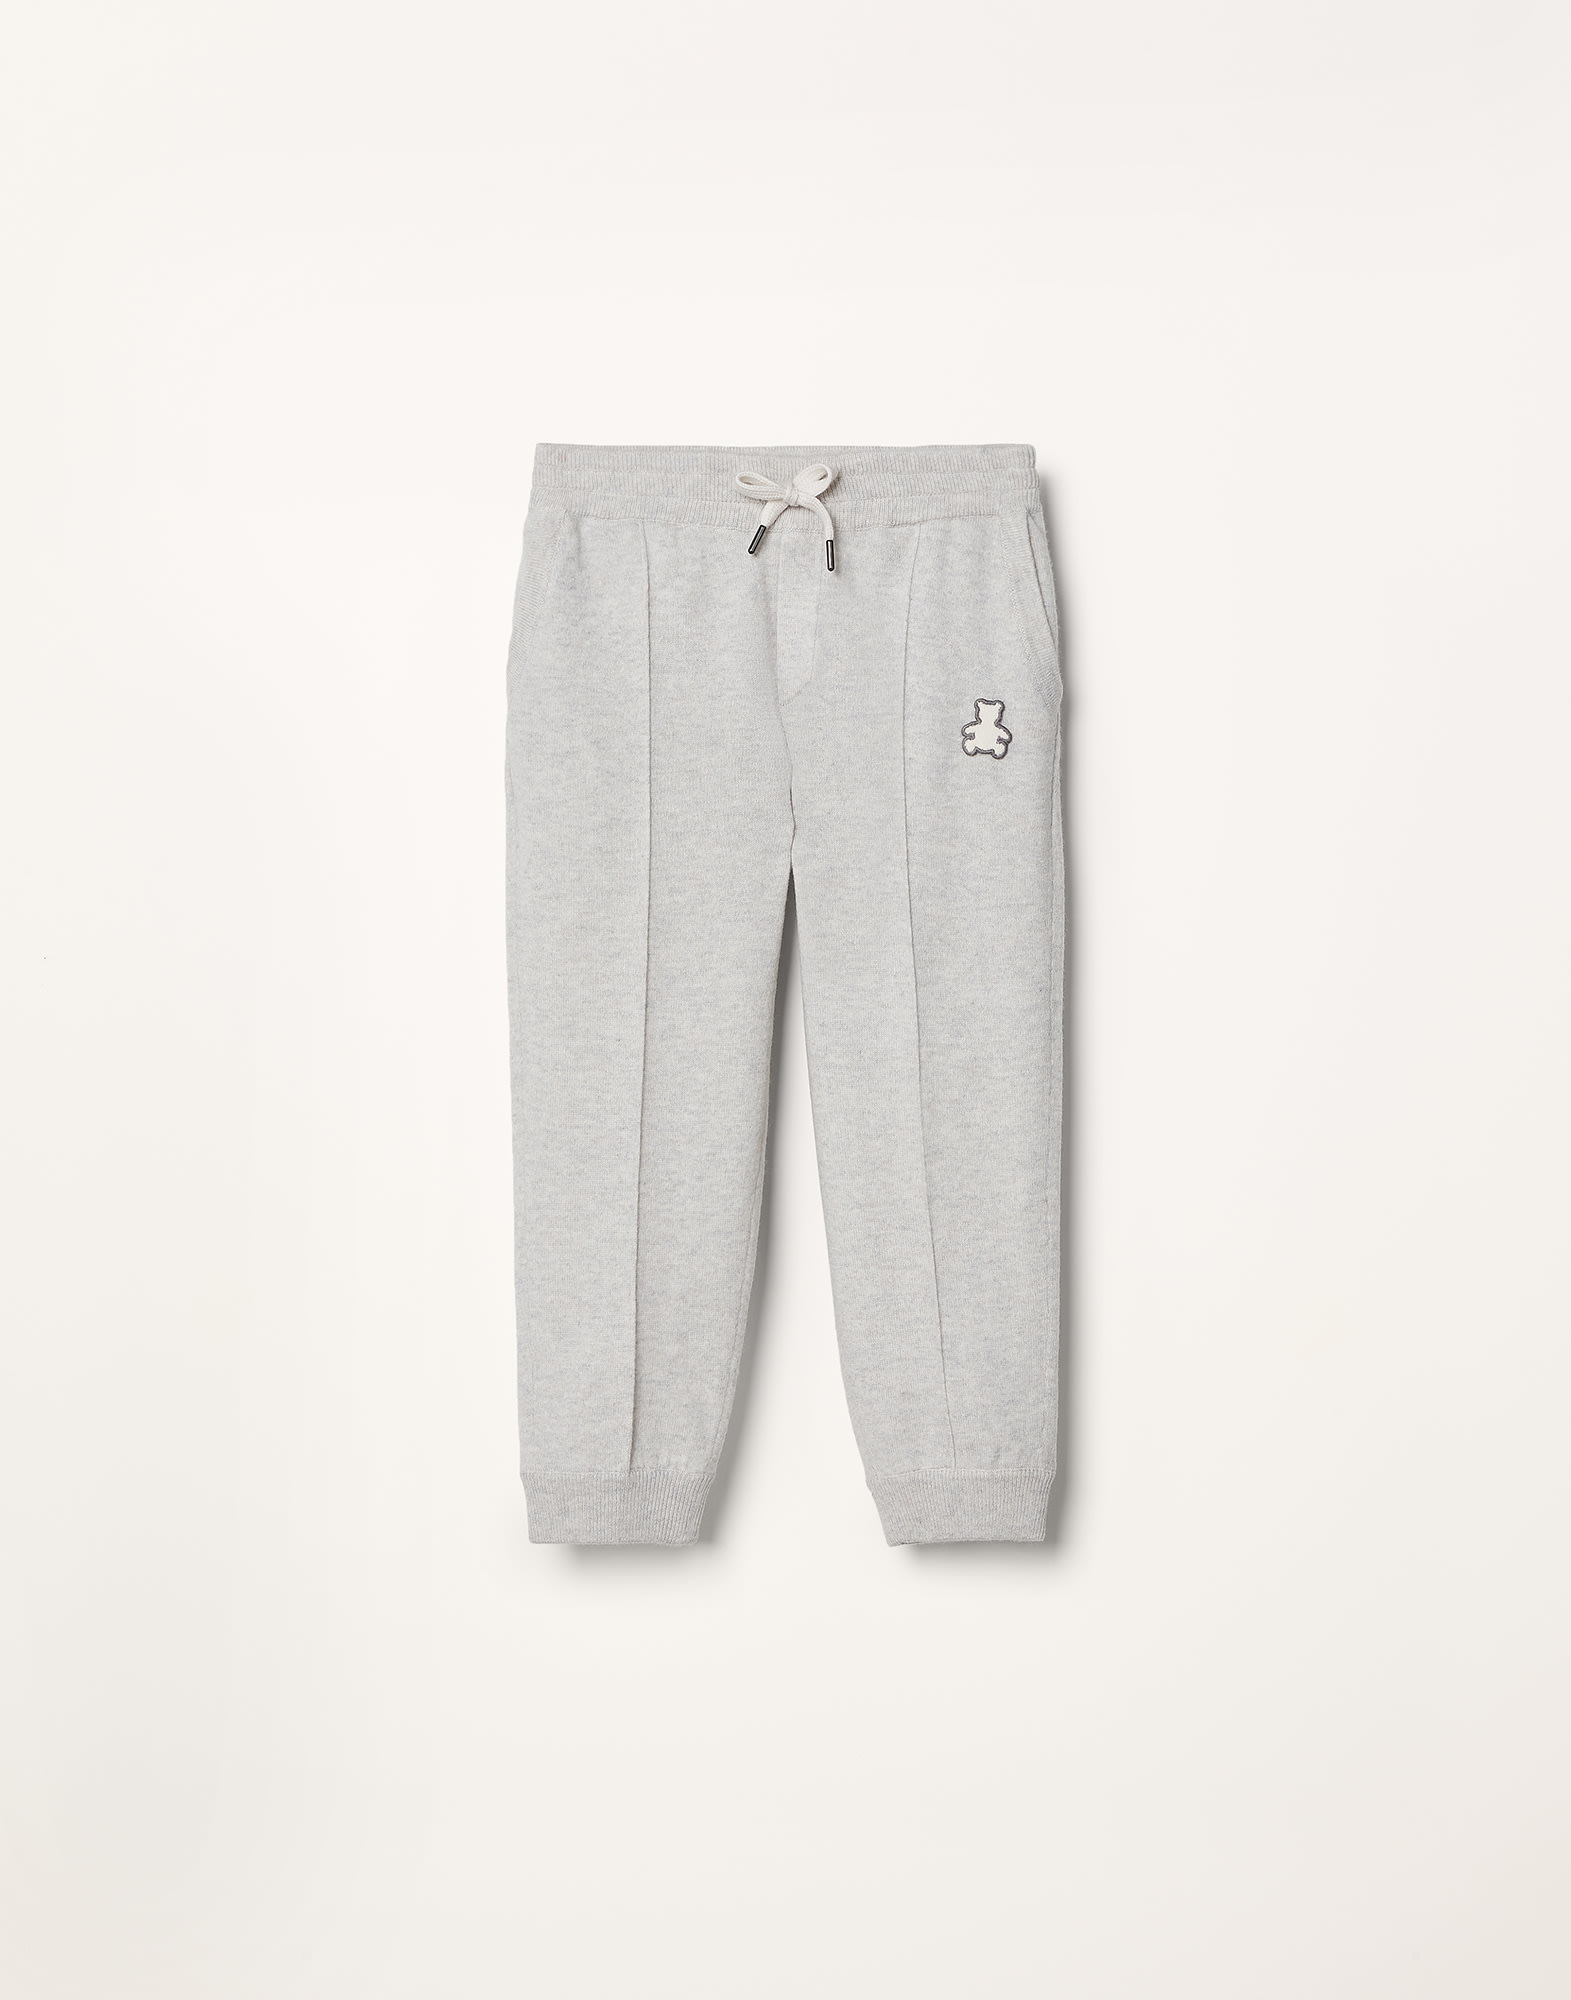 Cashmere knit trousers